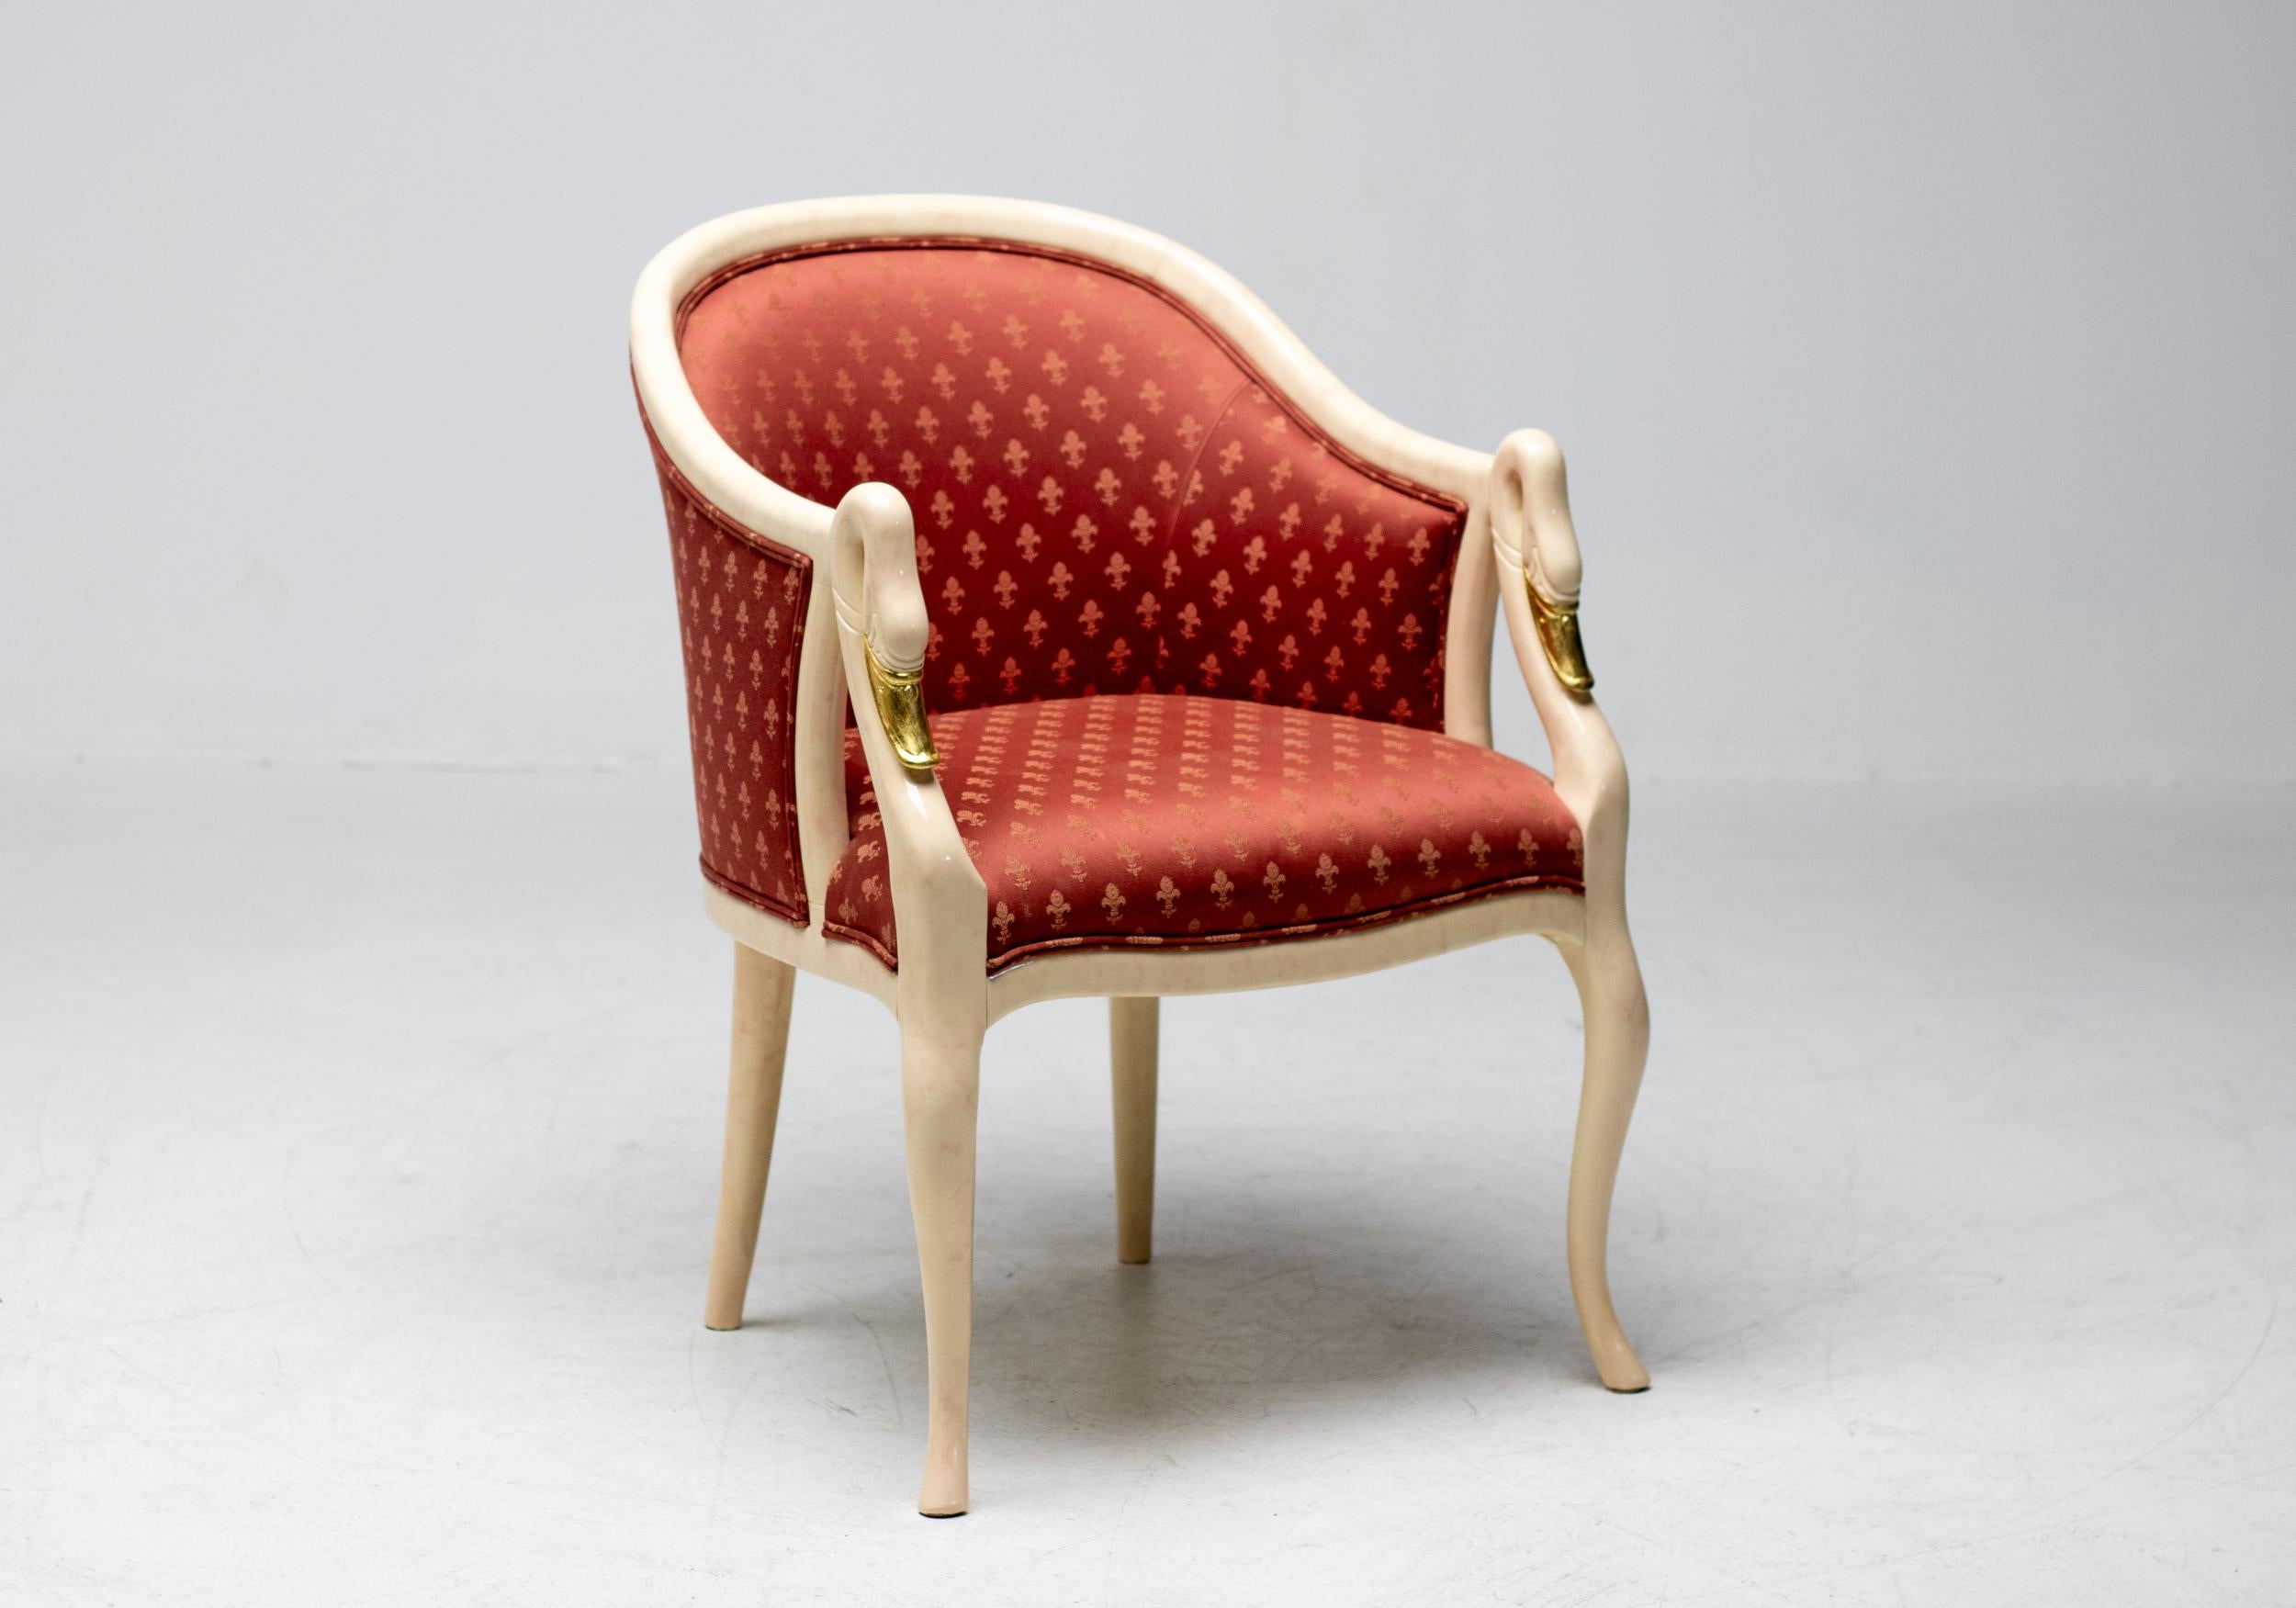 Beautiful pair of artisan crafted chairs. Marble paint and gold leaf was the choice for the organic shaped solid wood framework. A poppy red damask fabric was applied by the master upholsterers of Trüggelman. This is an excellent choice either as an